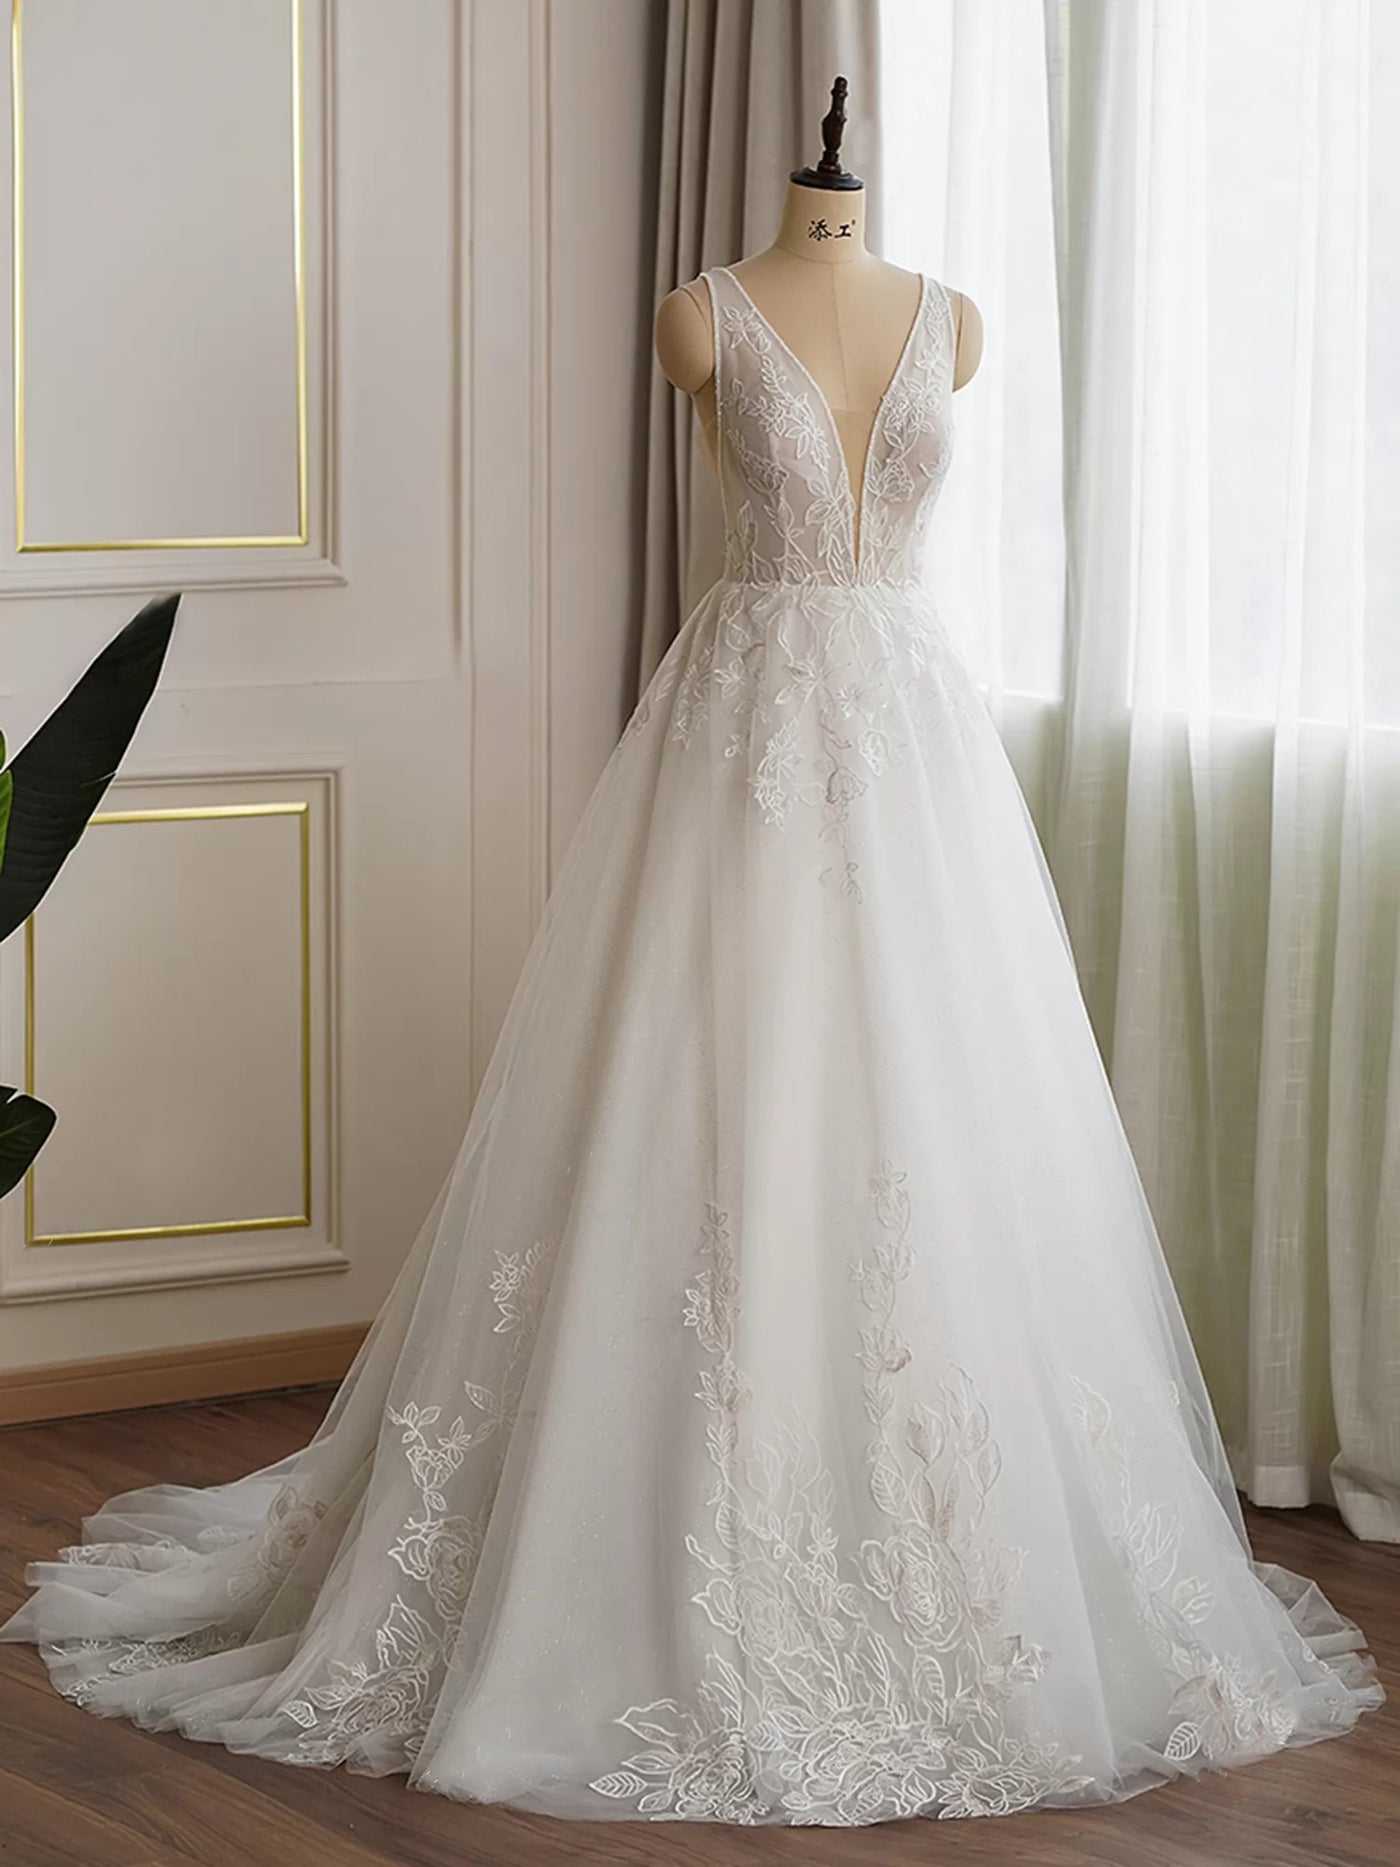 A Plunging V Neckline Lace Ball Gown Bridal Dress in a Bergamot Bridal shop window.